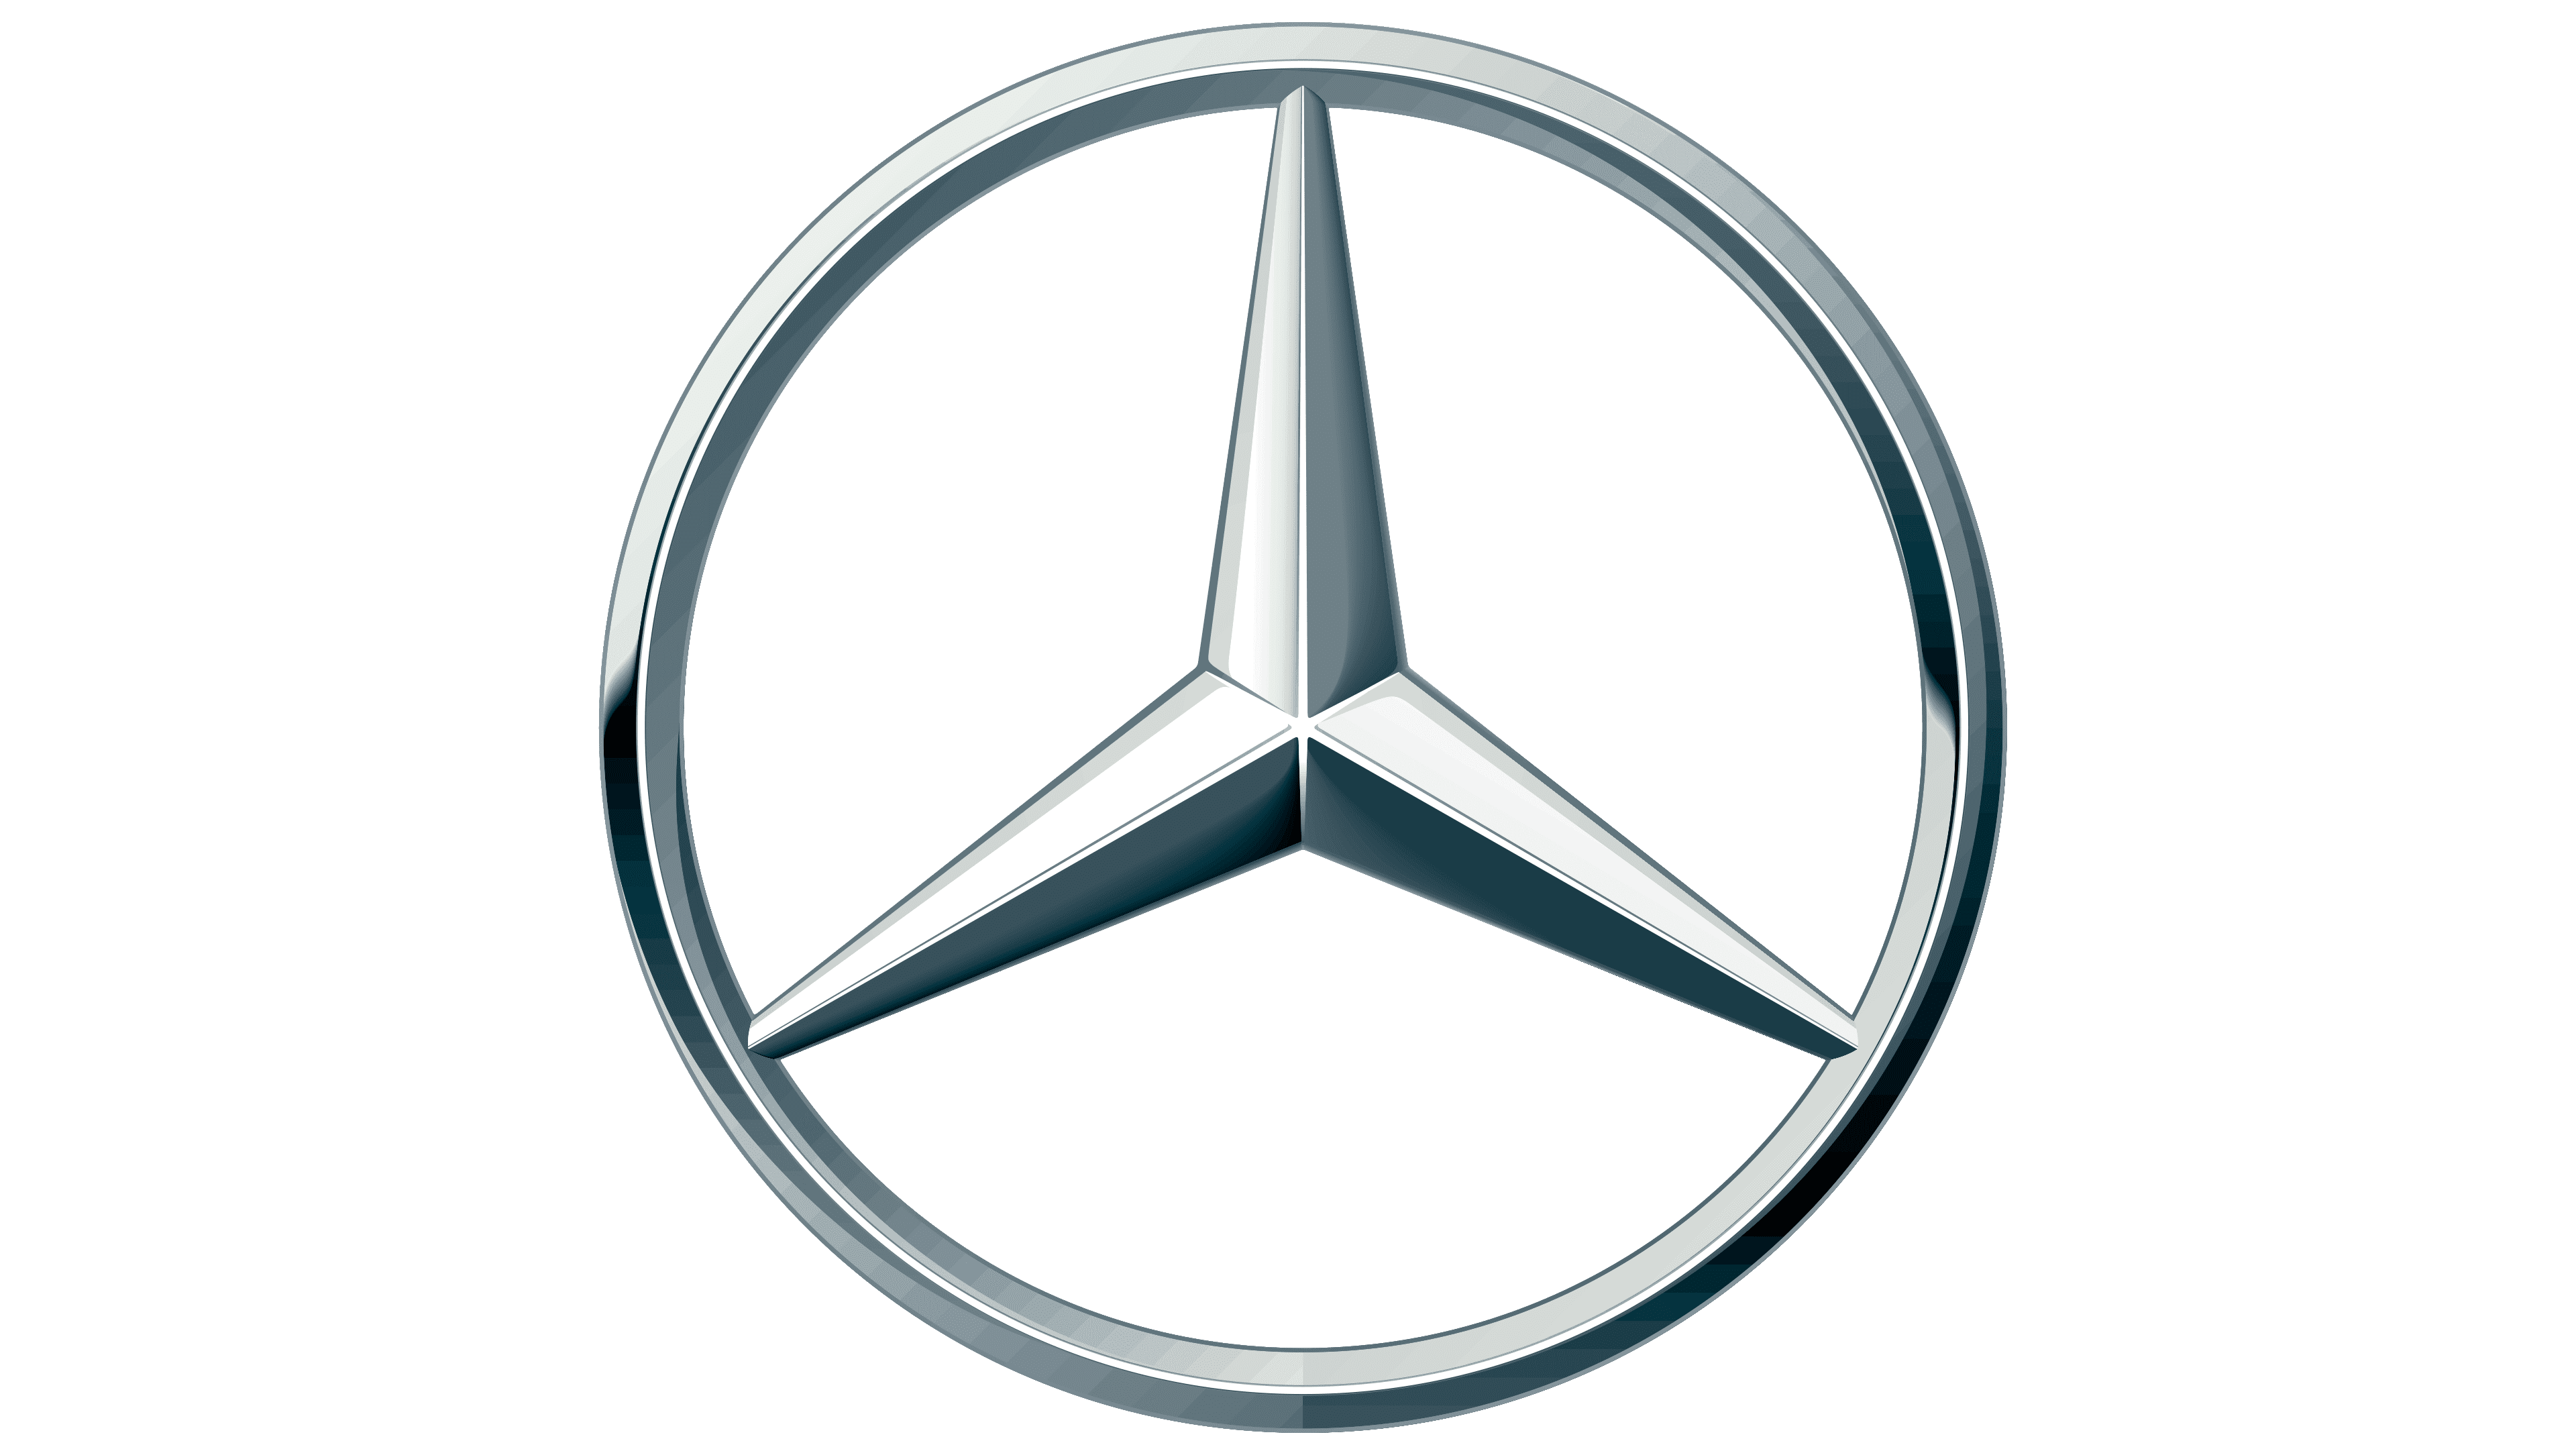 Mercedes-Benz Group: Setting Standards Among the Top Car Manufacturing Companies in the World